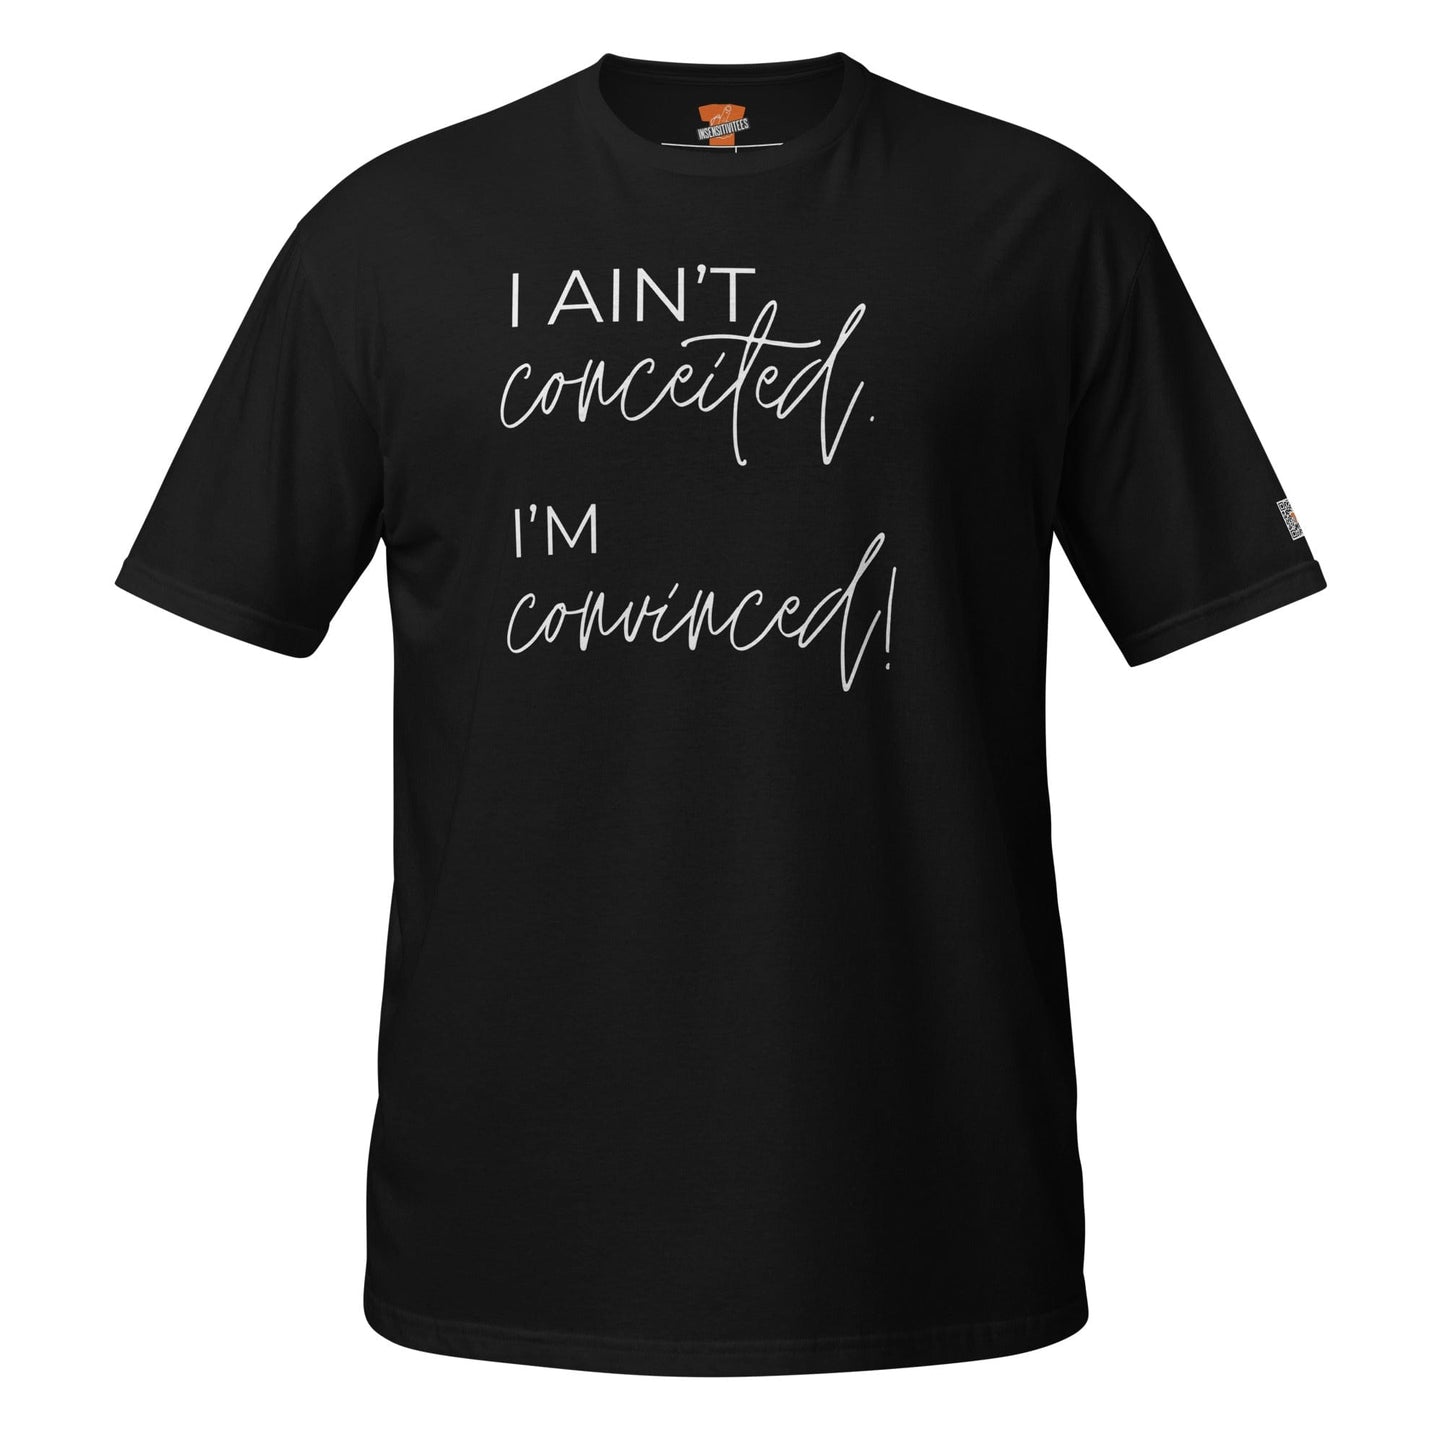 InsensitiviTees™️ Black / S I Ain't Conceited. I'm Convinced. Unisex Tee